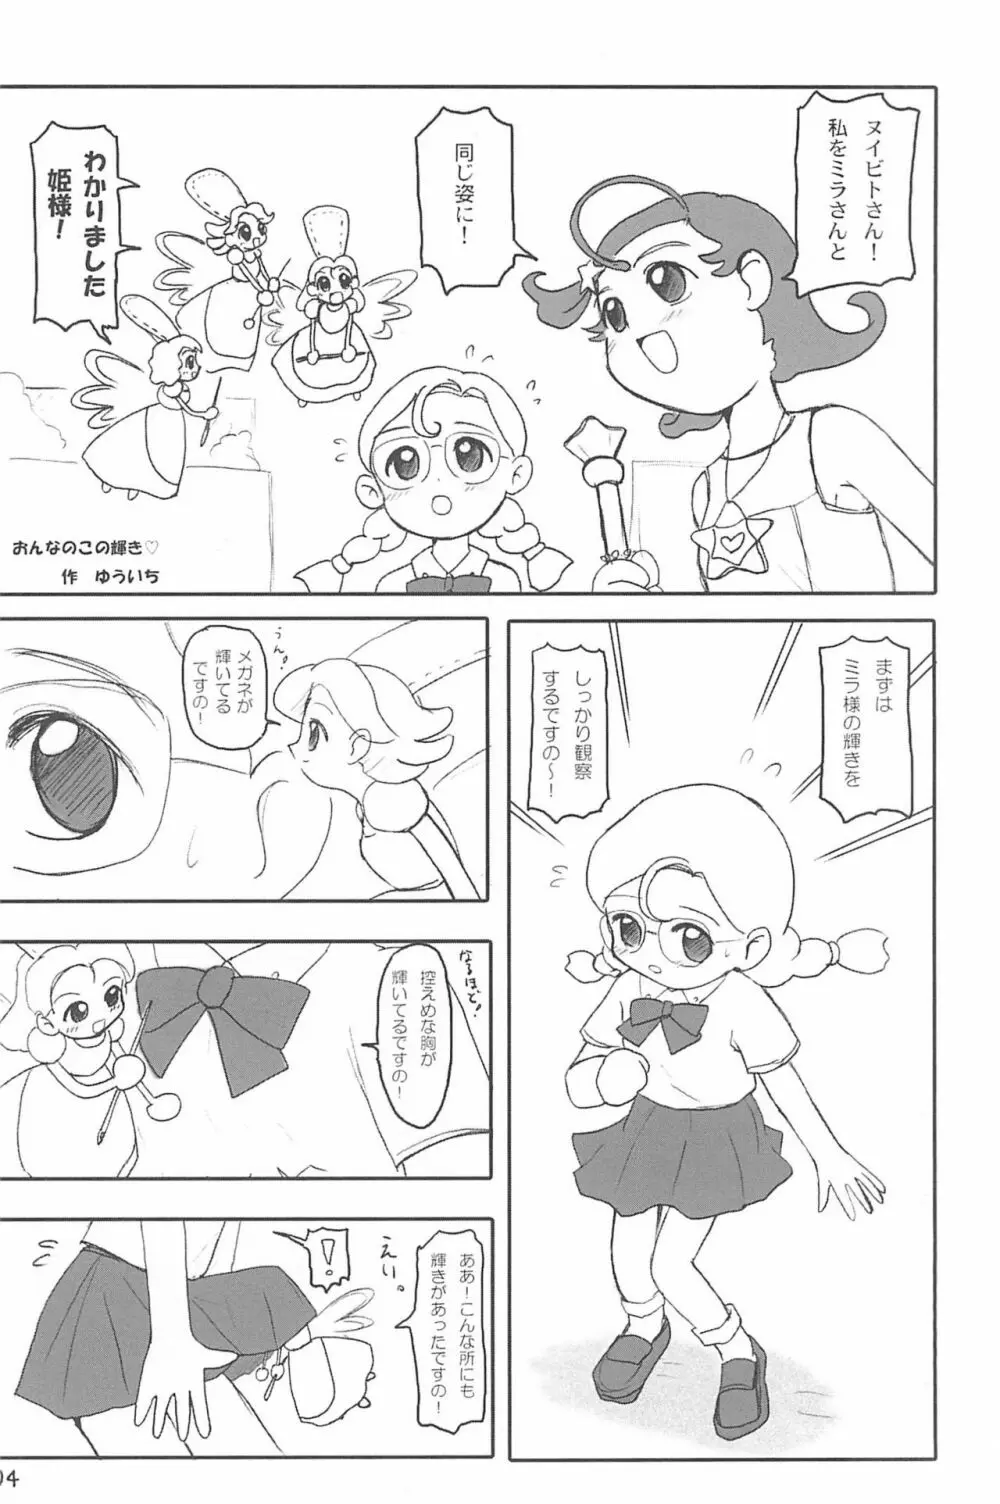 ND-special Volume 4 Page.4